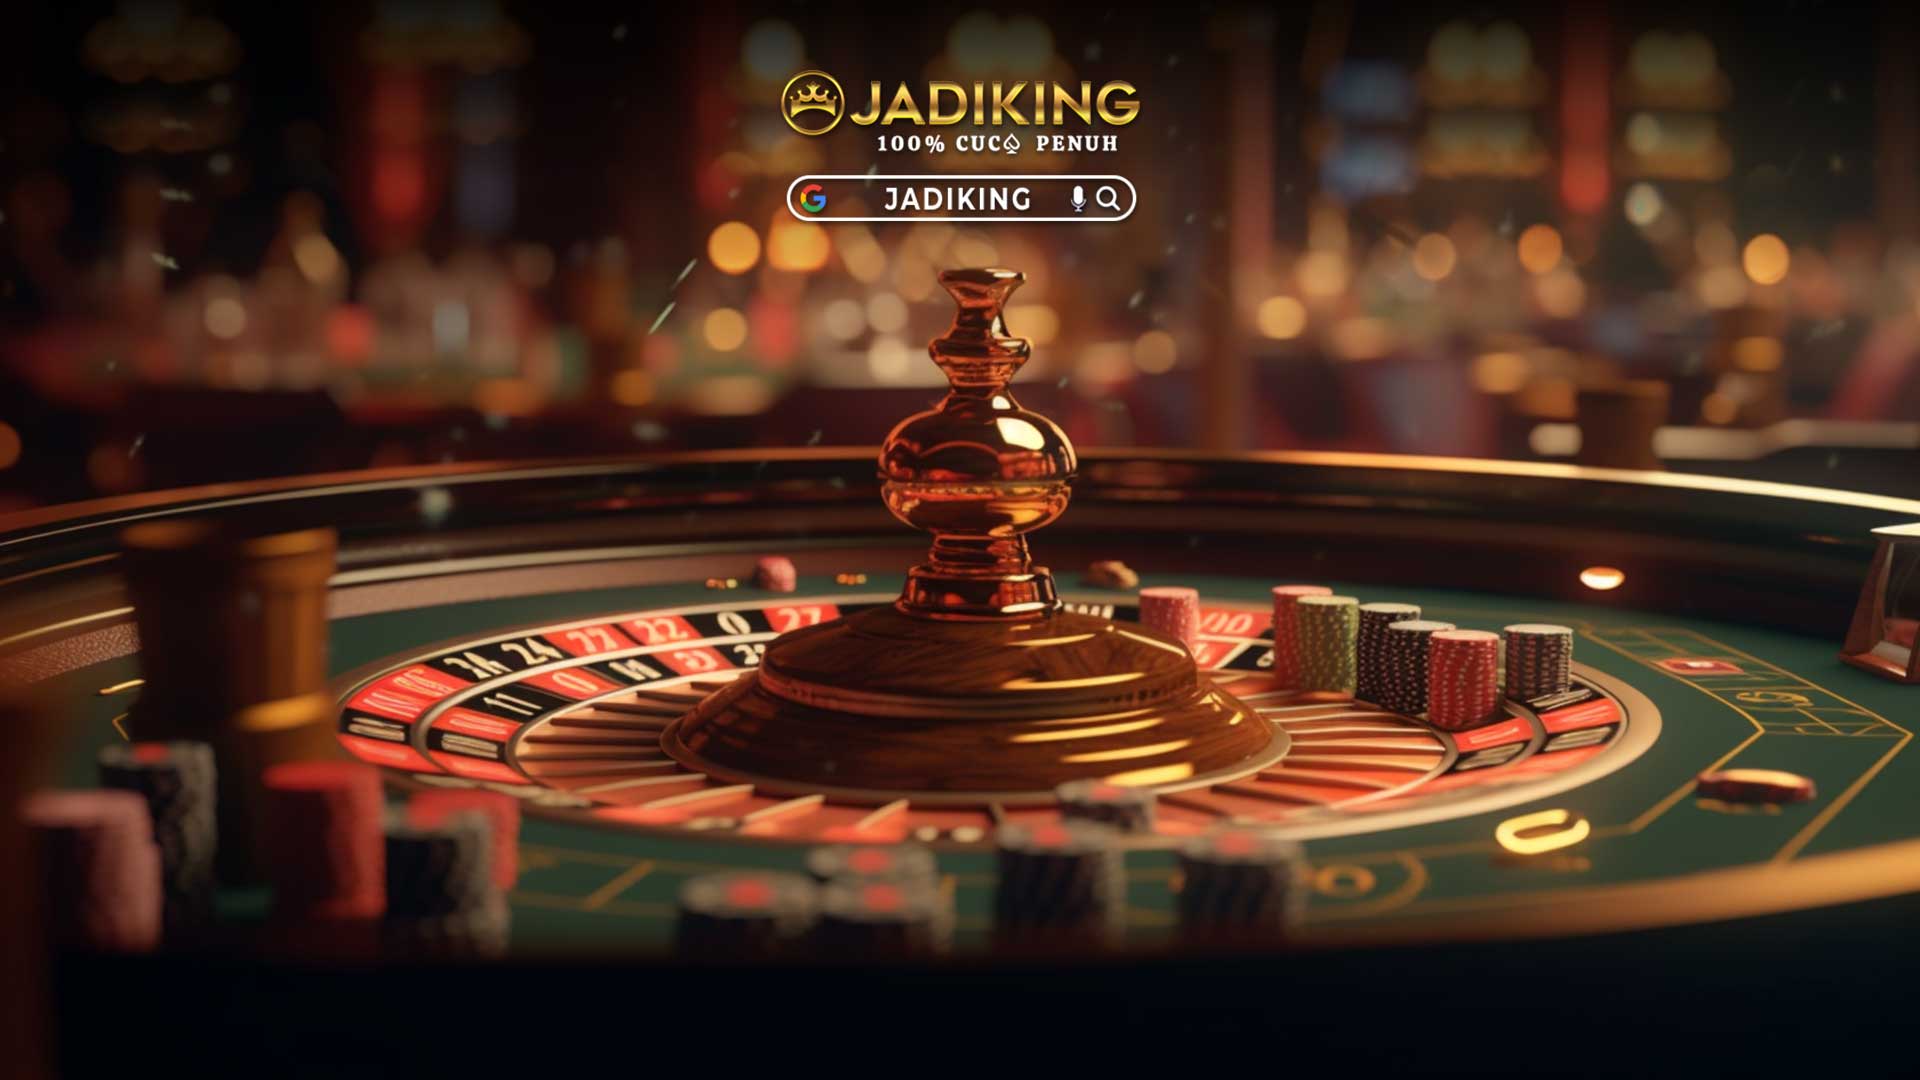 Get Ready to Hit the Jackpot with Malaysia Online Casino Free Kredit RM10